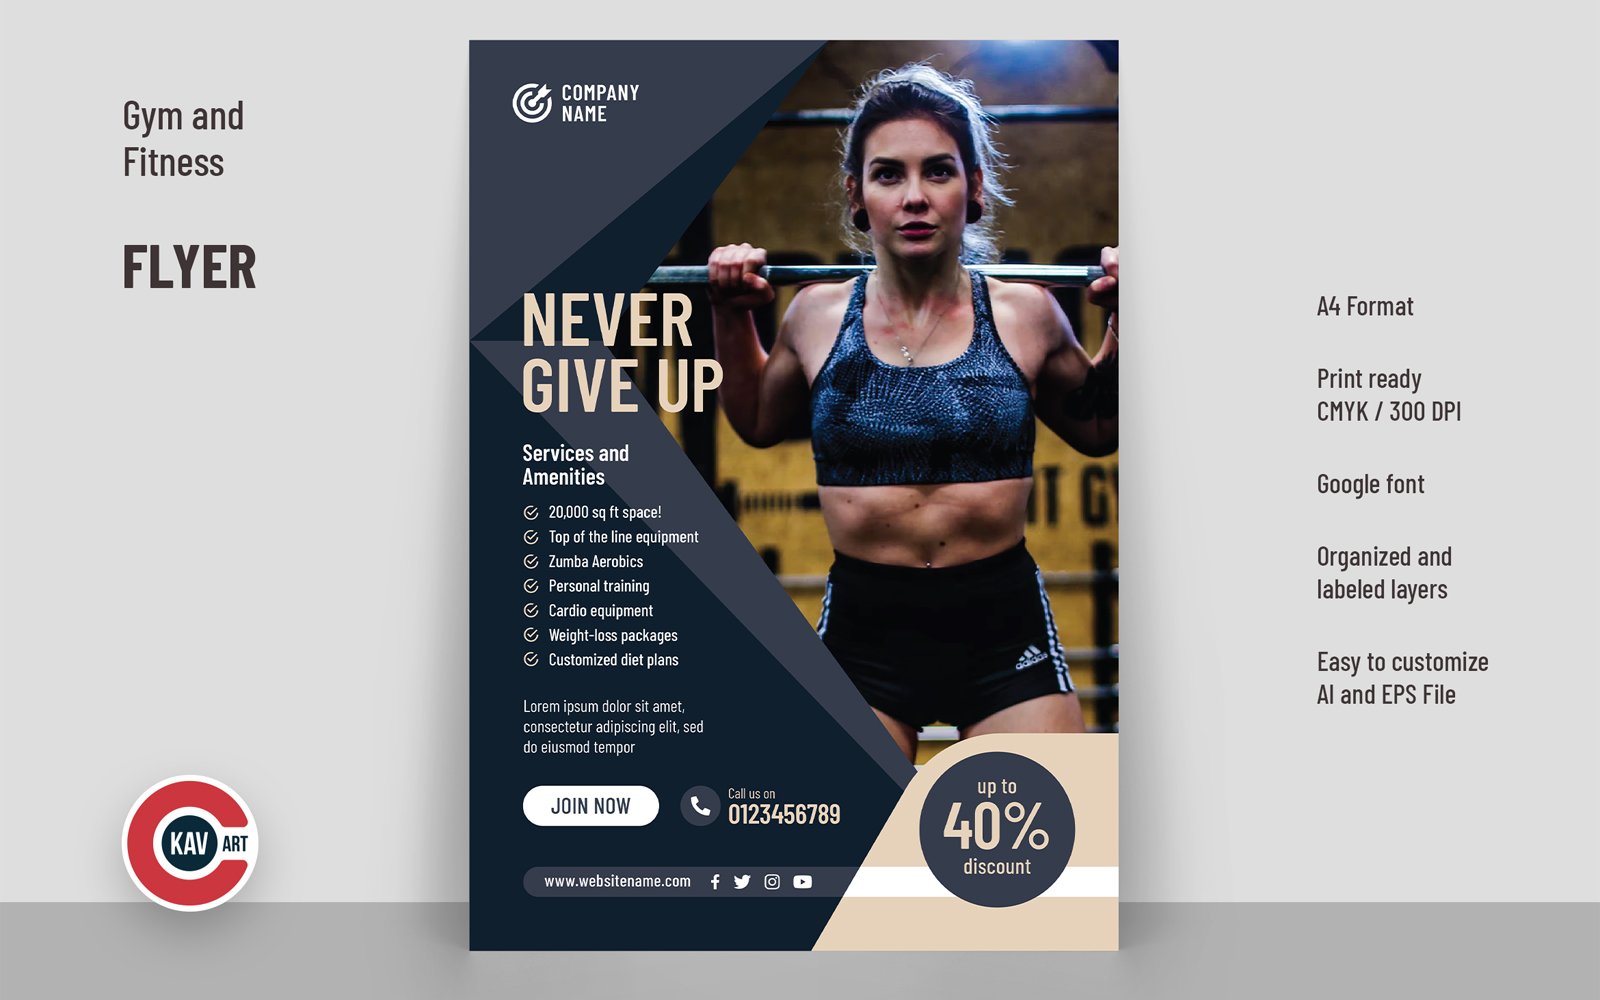 Flyer or Poster Template for Gym and Fitness - 00210